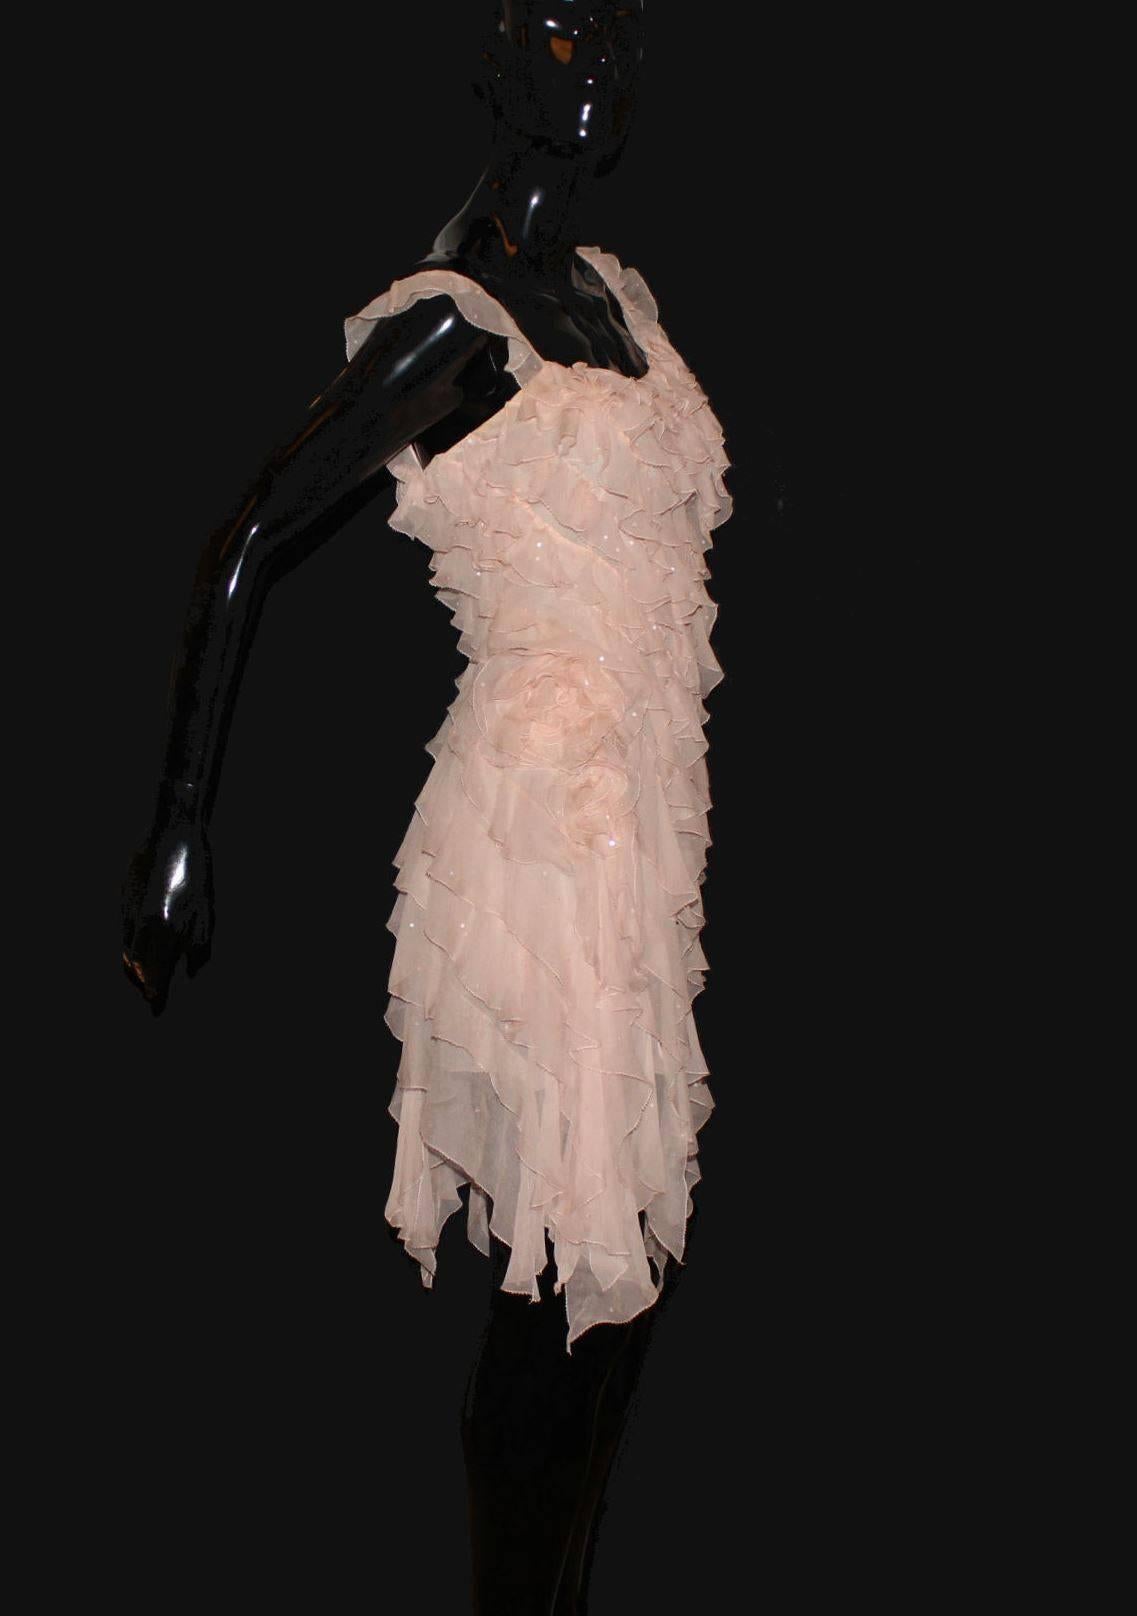     Gorgeous nude pink ATELIER VERSACE dress
ATELIER VERSACE is the Haute Couture Line by Versace
    Asymmetric style
    Beautiful ruched details
    Embroidered with sequins
    Rose flower detail
    Closes with a hidden zip
Dry Clean Only
Made